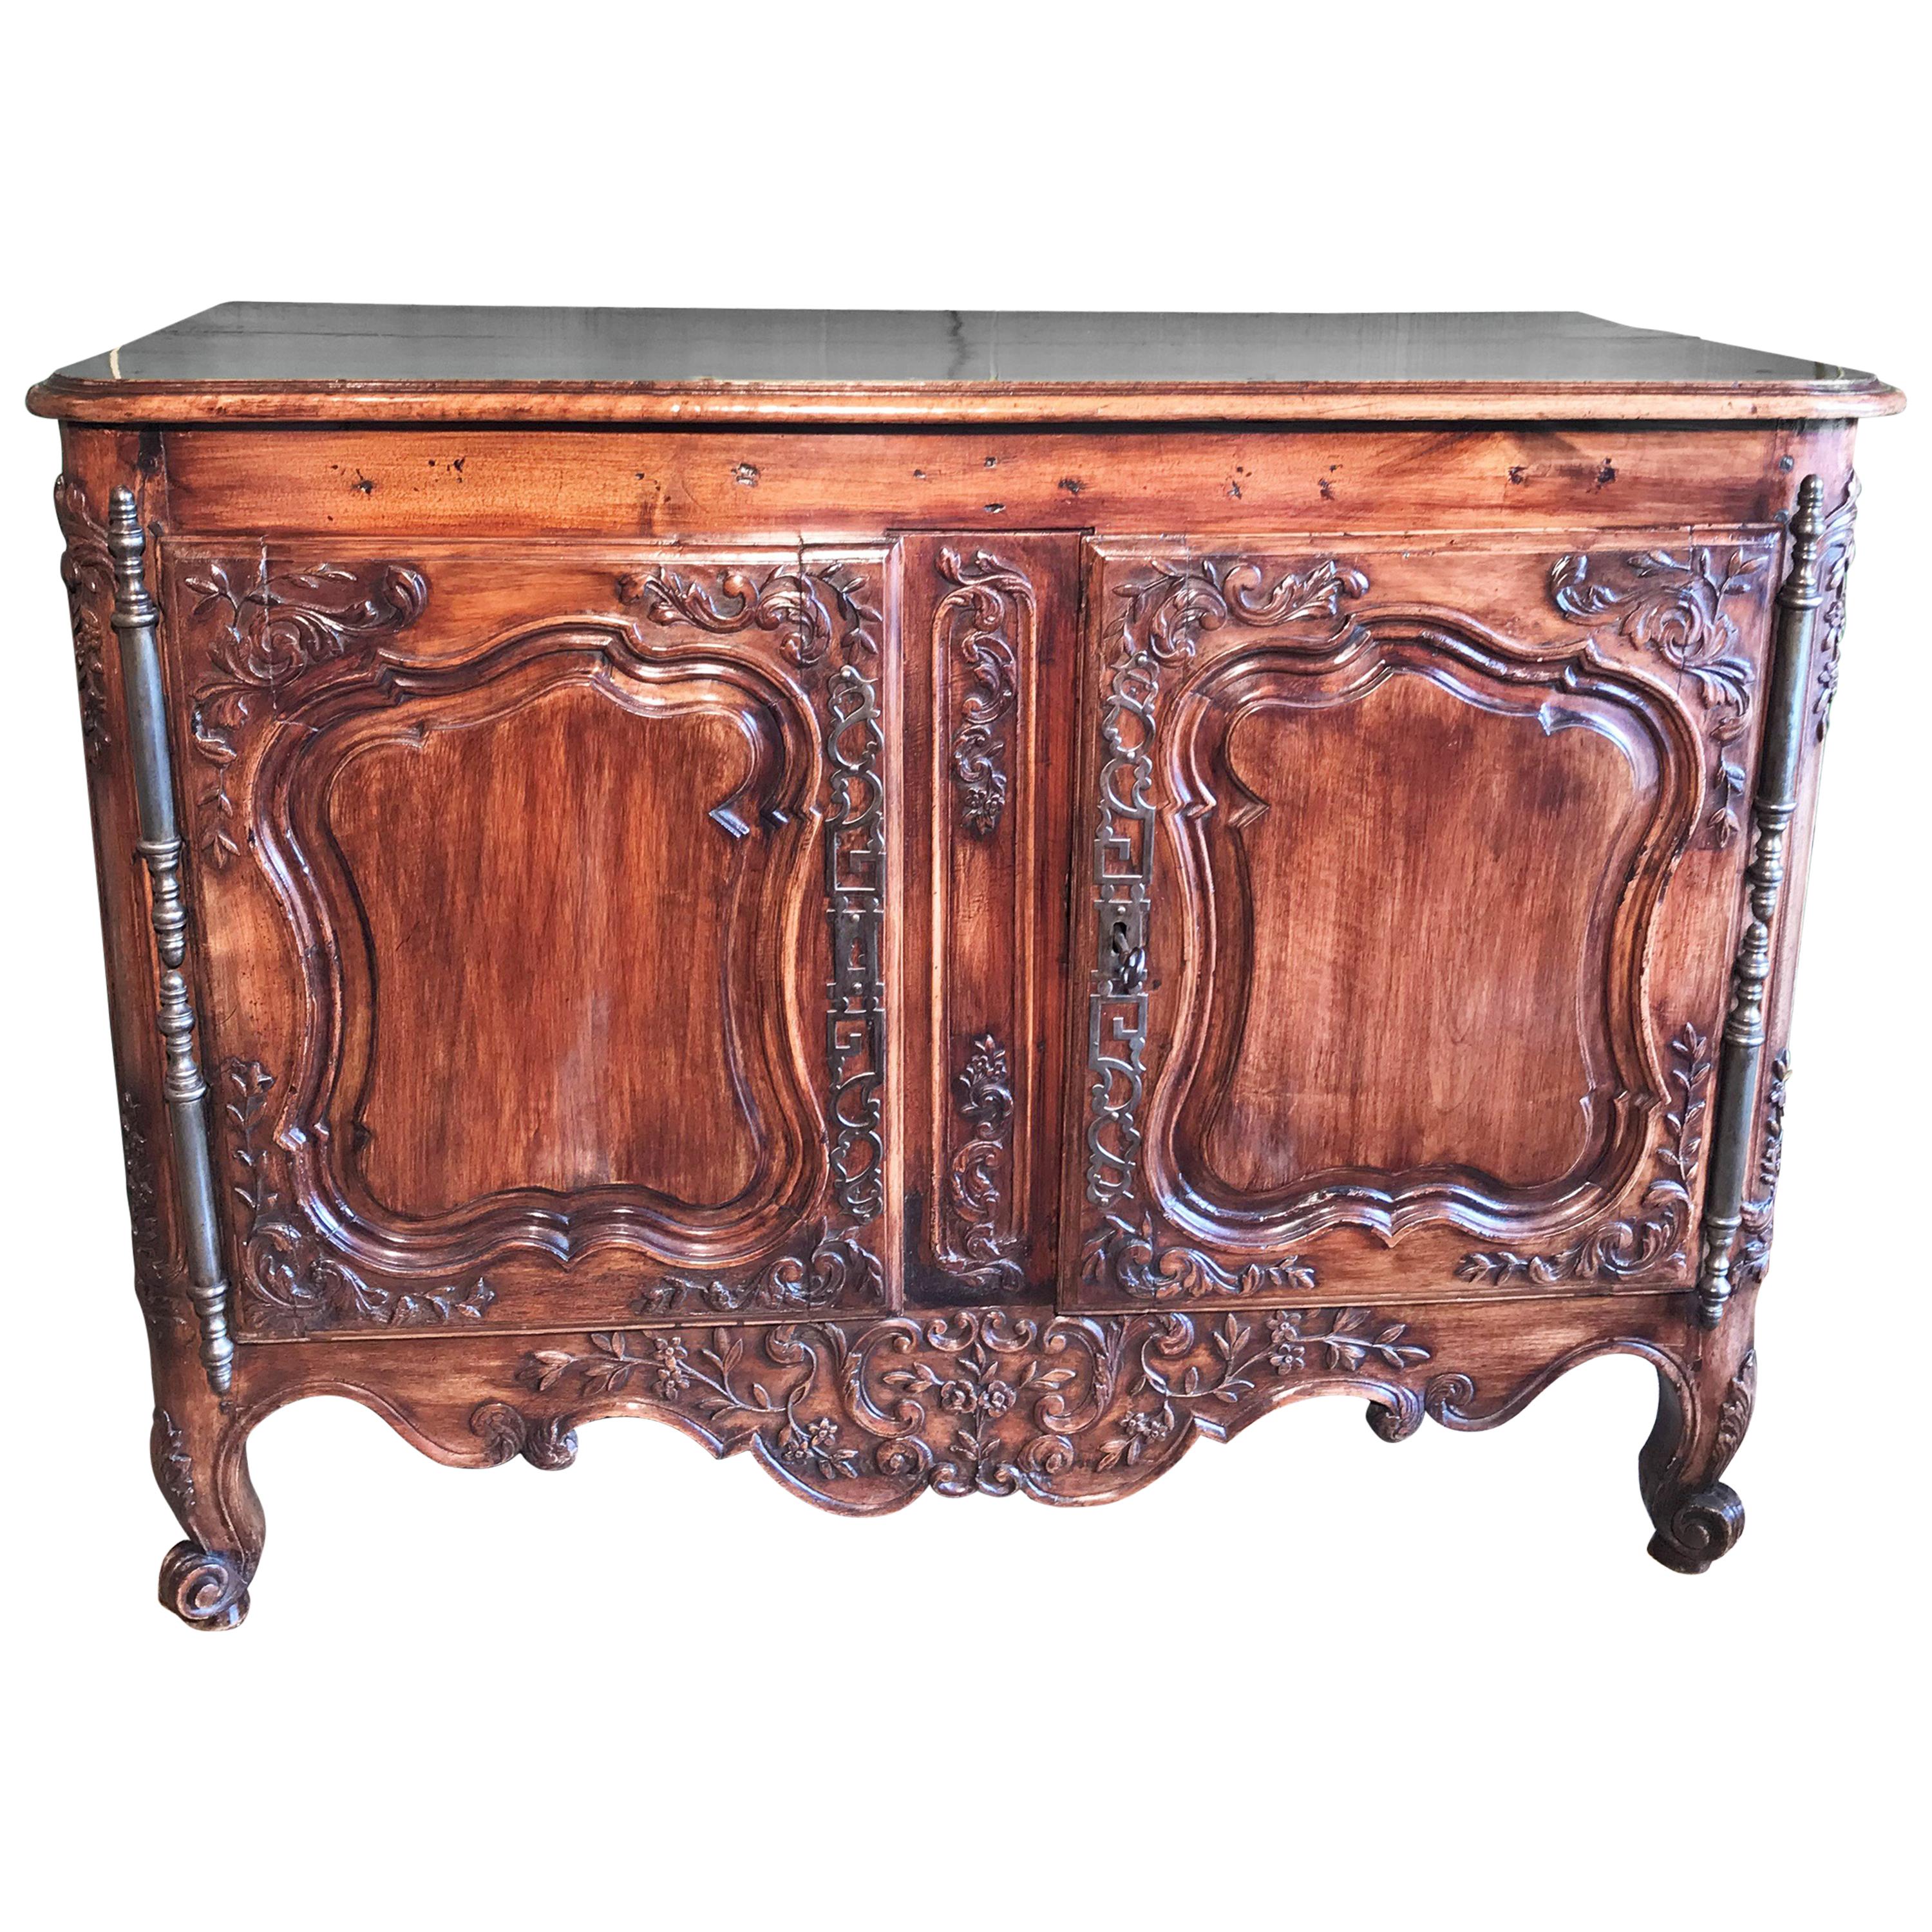 18th C. French Provencal Arlesienne Credence in Walnut Antiques Los Angeles CA